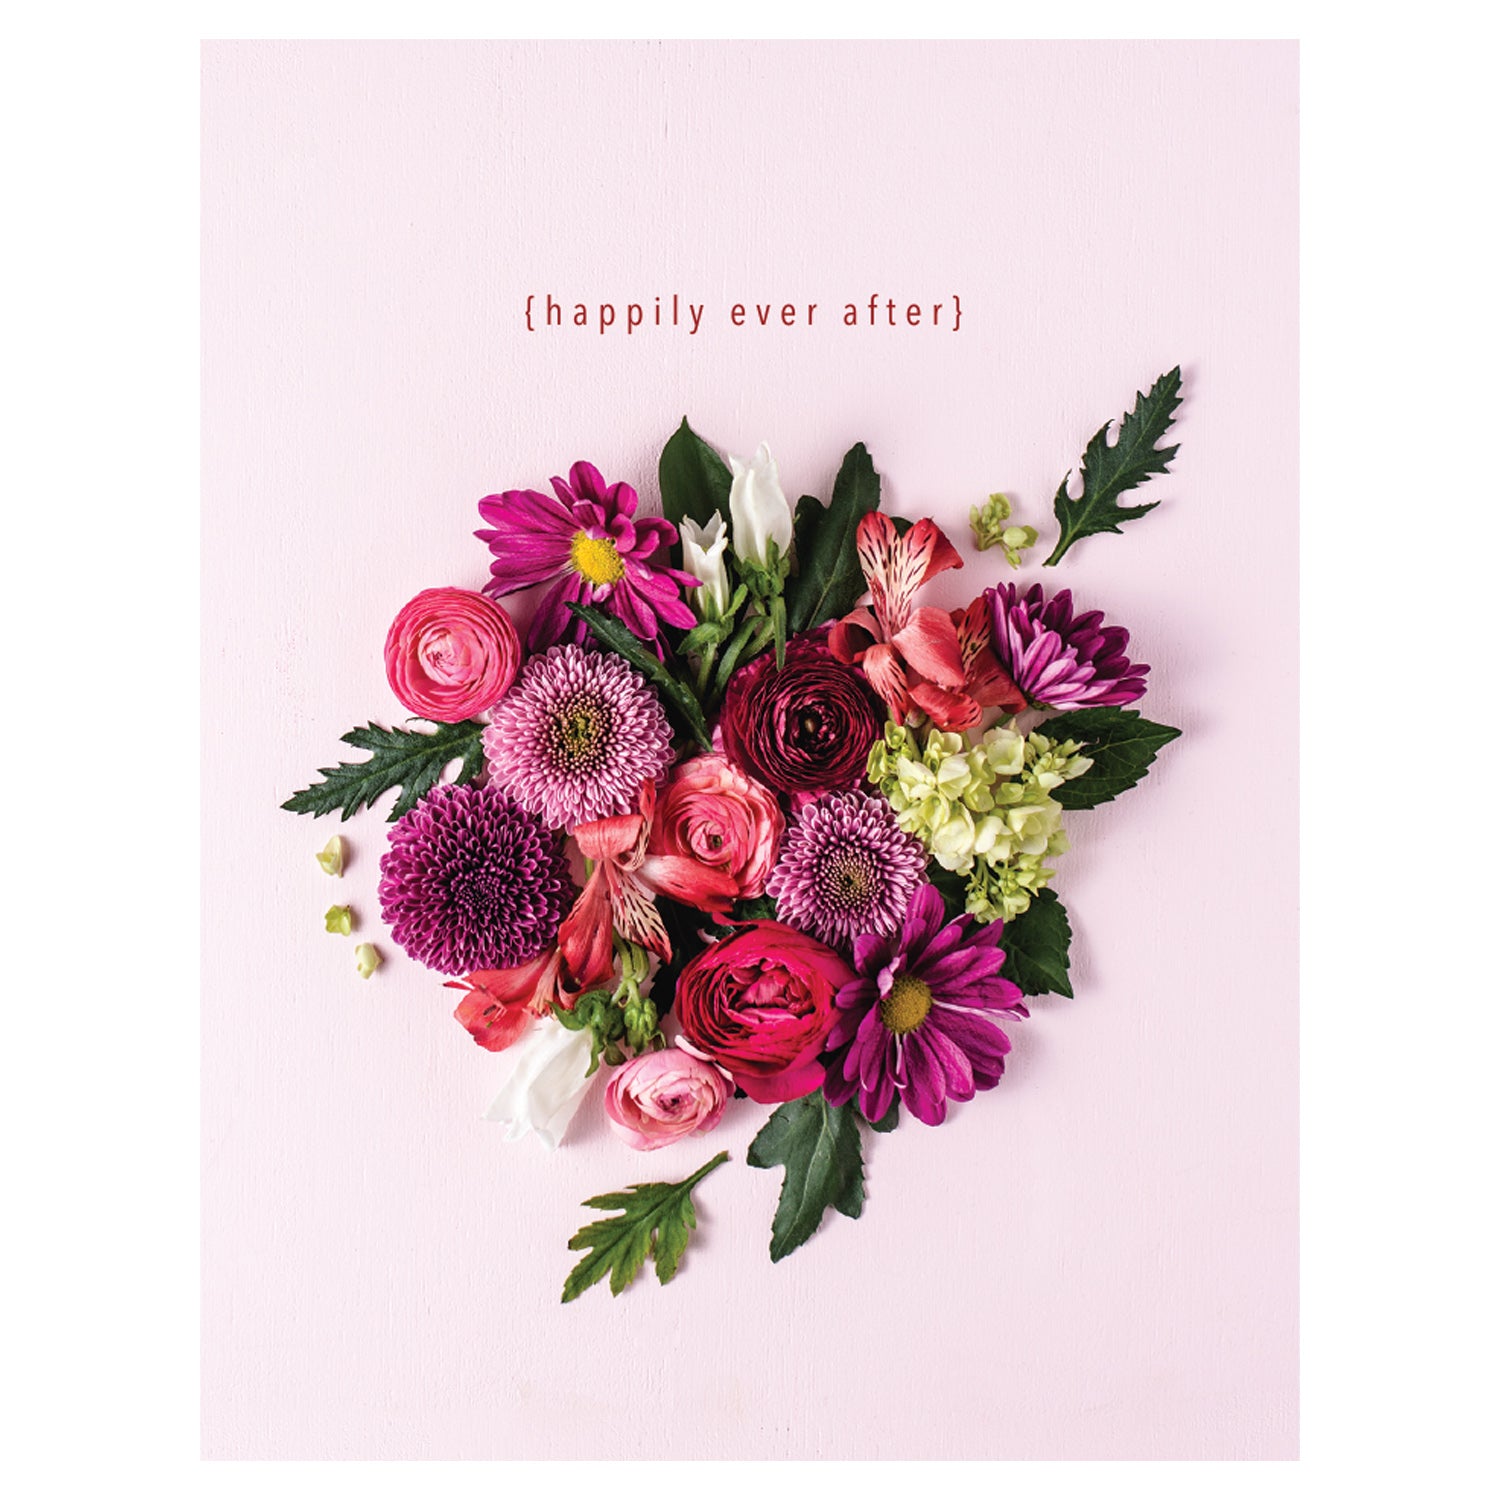 A photo of various pink and purple blooms and leaves arranged into a circle resembling the top of a lush bouquet on a light pink background, with {&quot;happily ever after&quot;} printed in dark pink above the flowers.